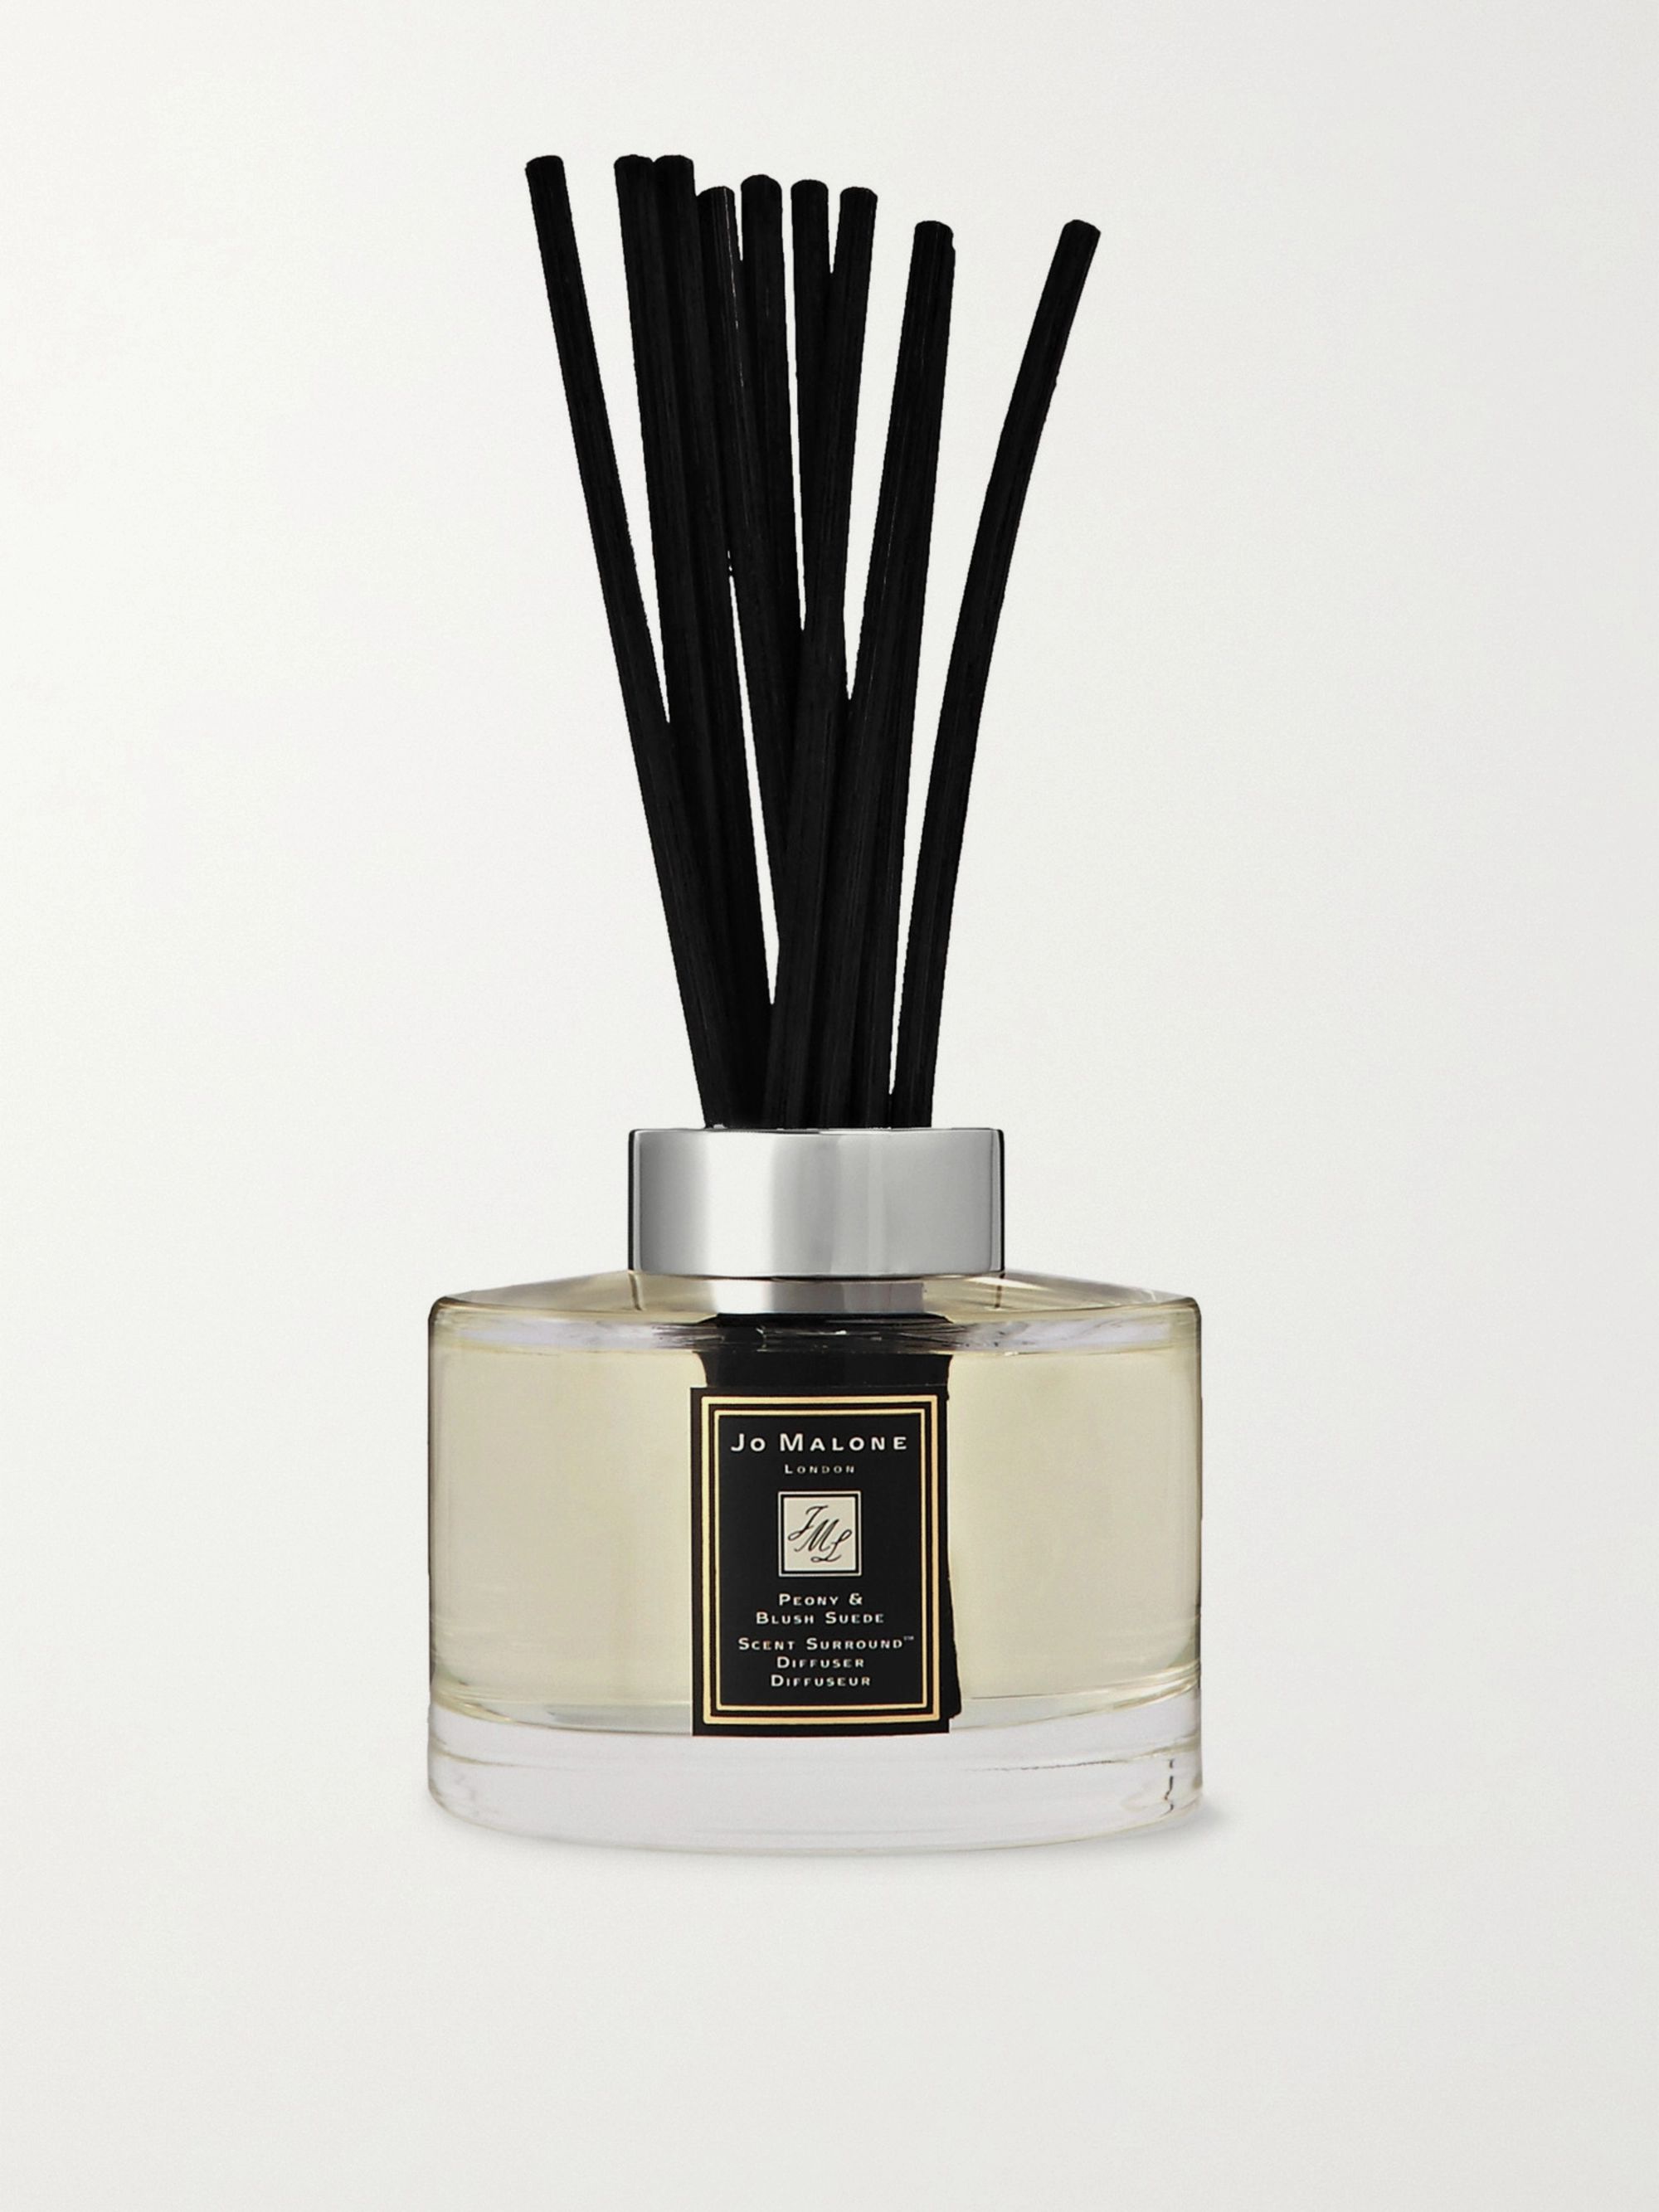 Colorless Peony and Blush Suede Scent Surround Diffuser Jo Malone